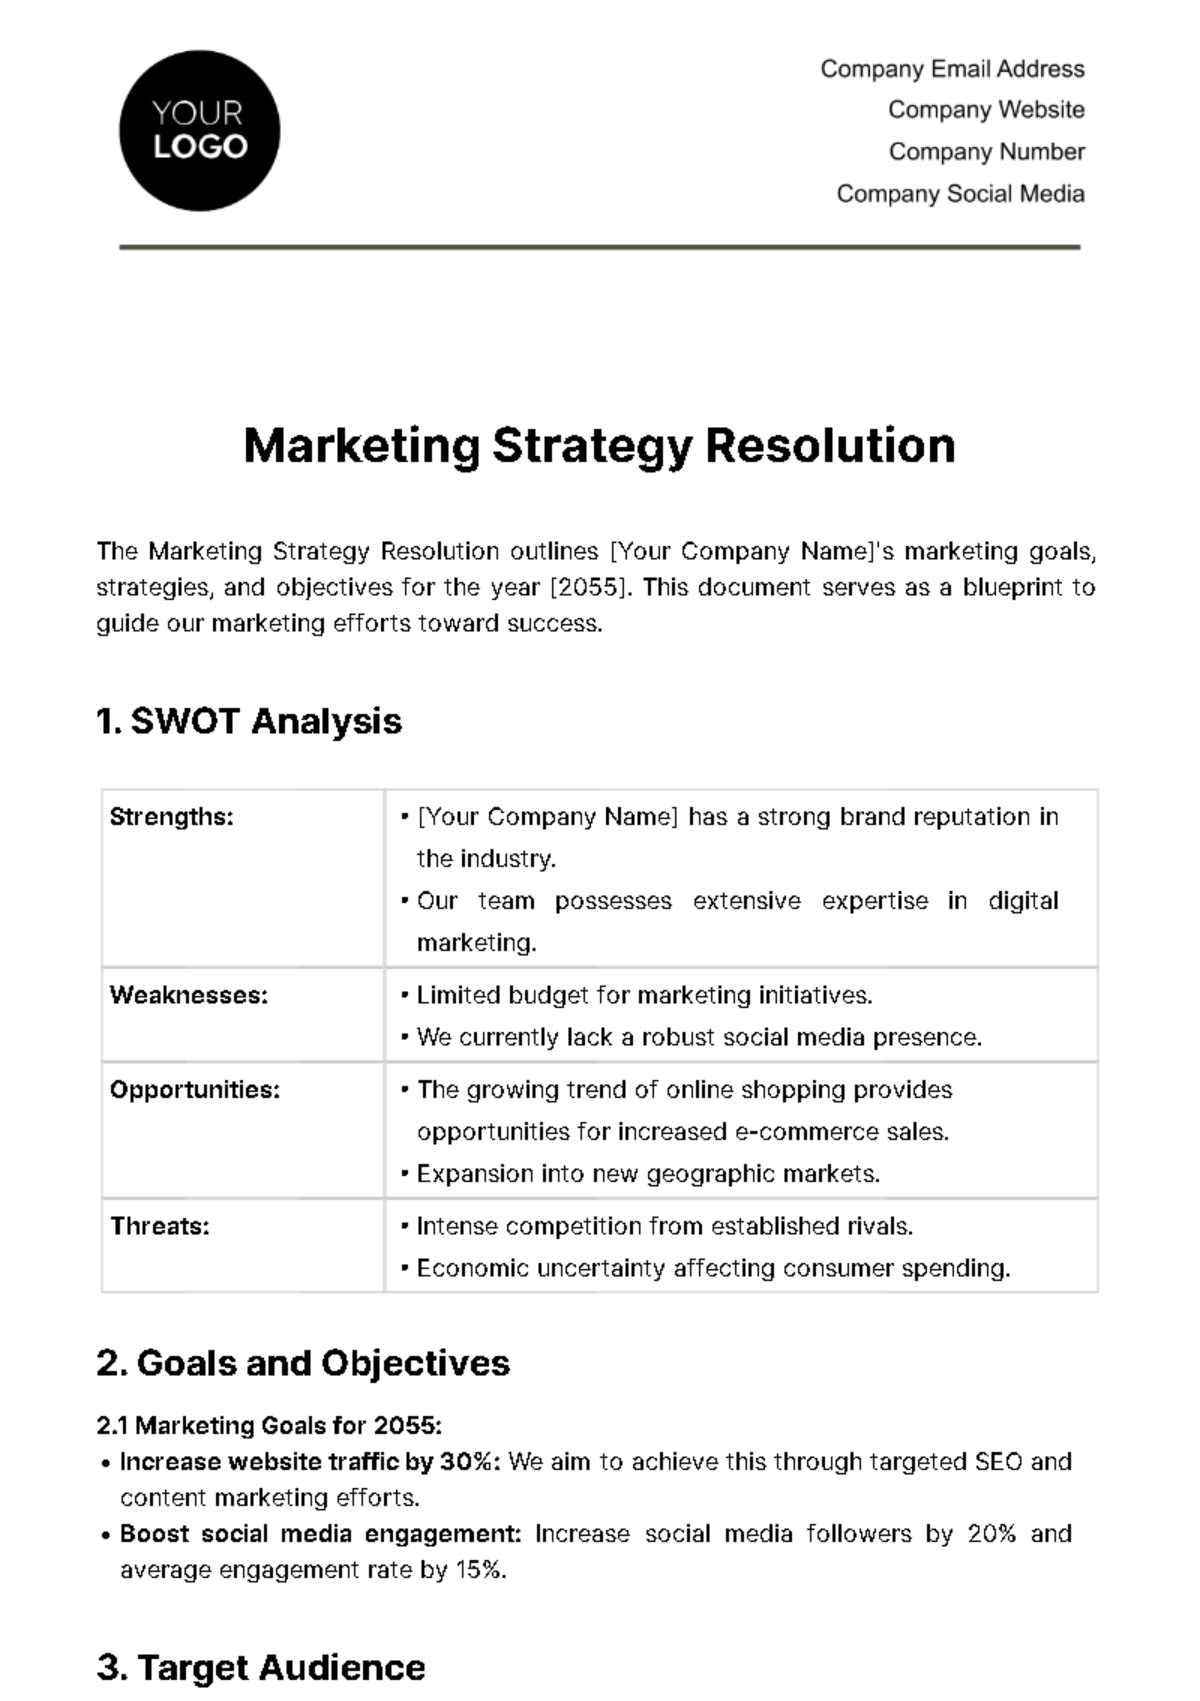 Free Marketing Strategy Resolution Template